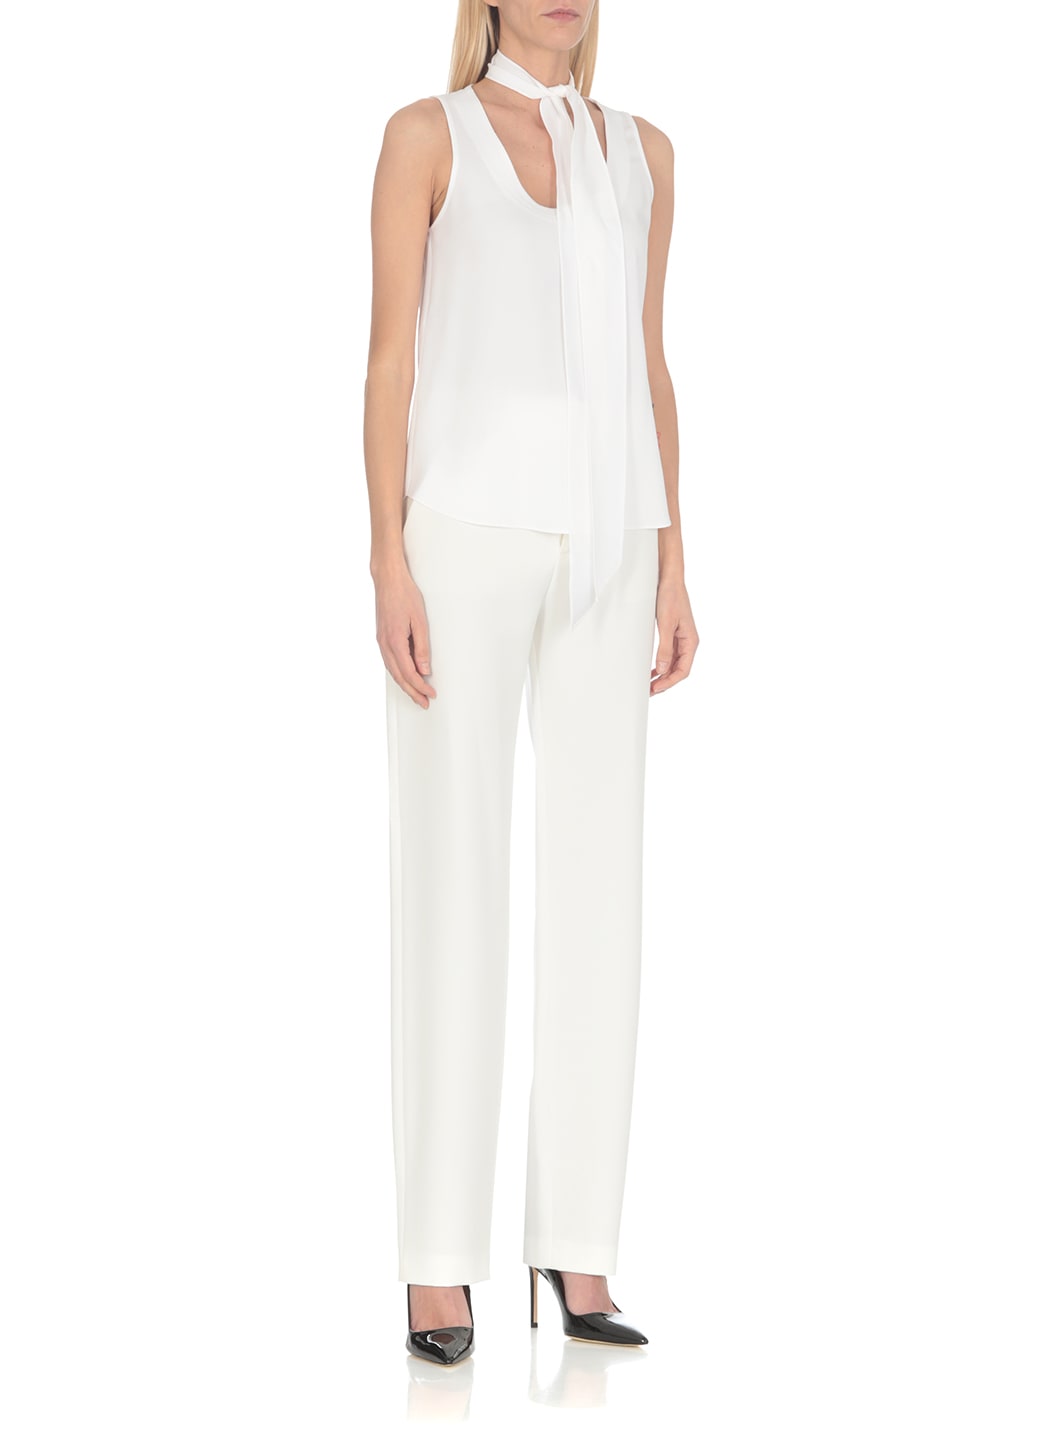 Shop Moschino Viscose Blend Blouse In White